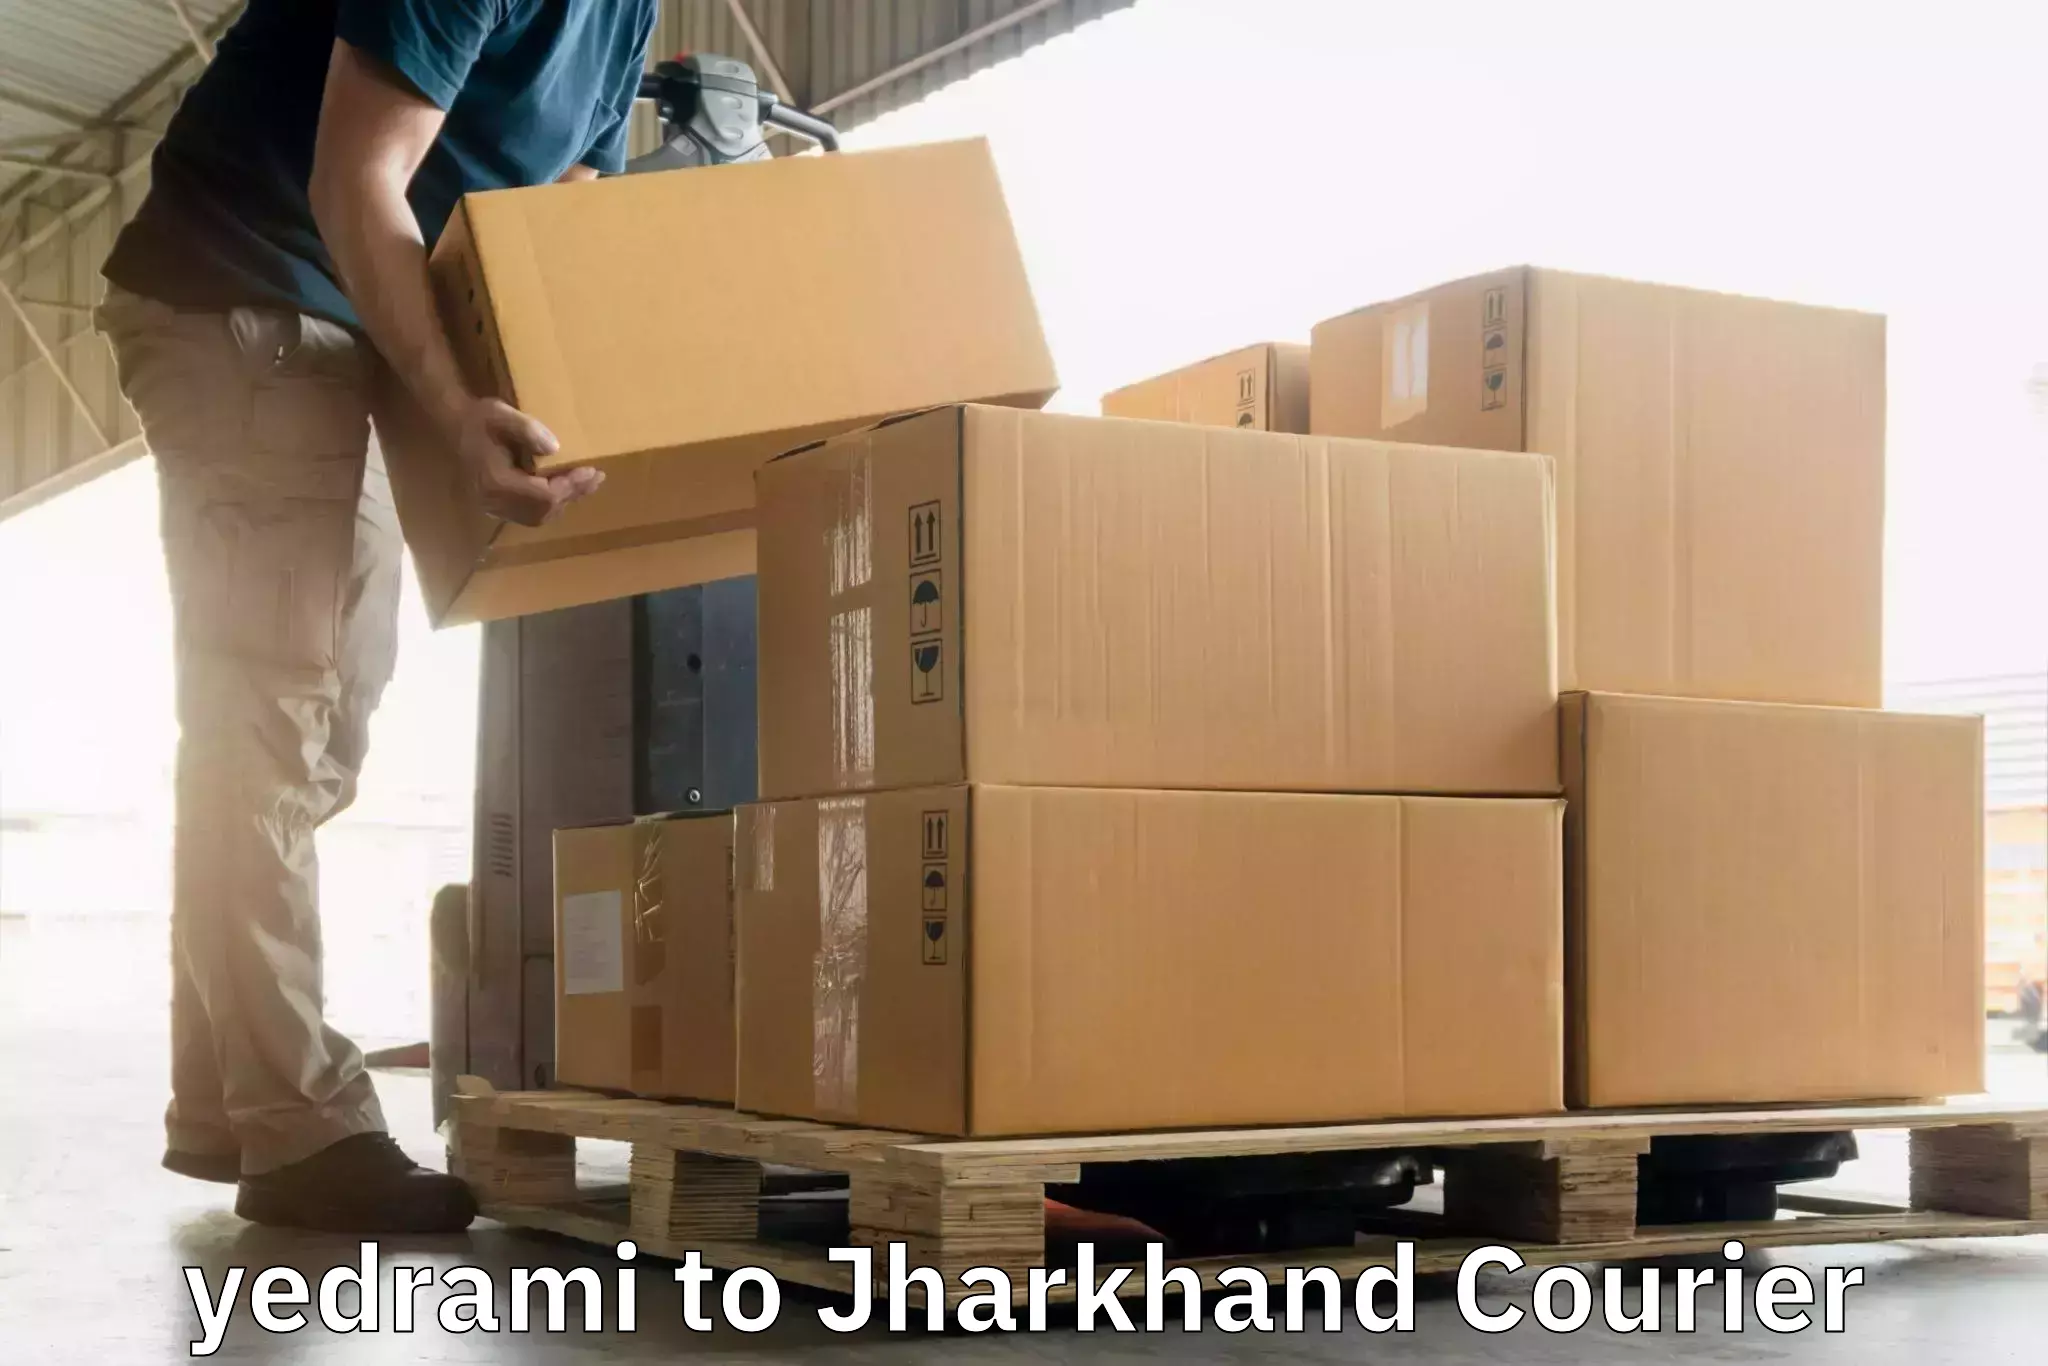 24-hour courier services yedrami to Ormanjhi